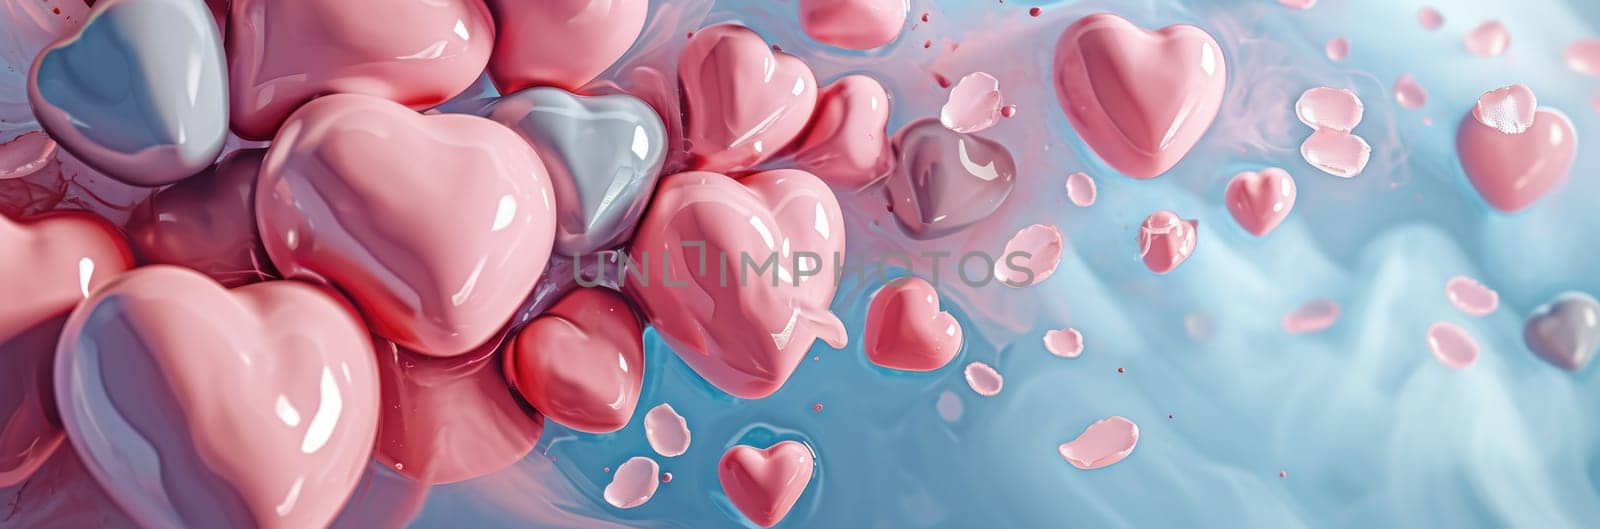 pink hearts valentines day abstract background and design backdrop pragma